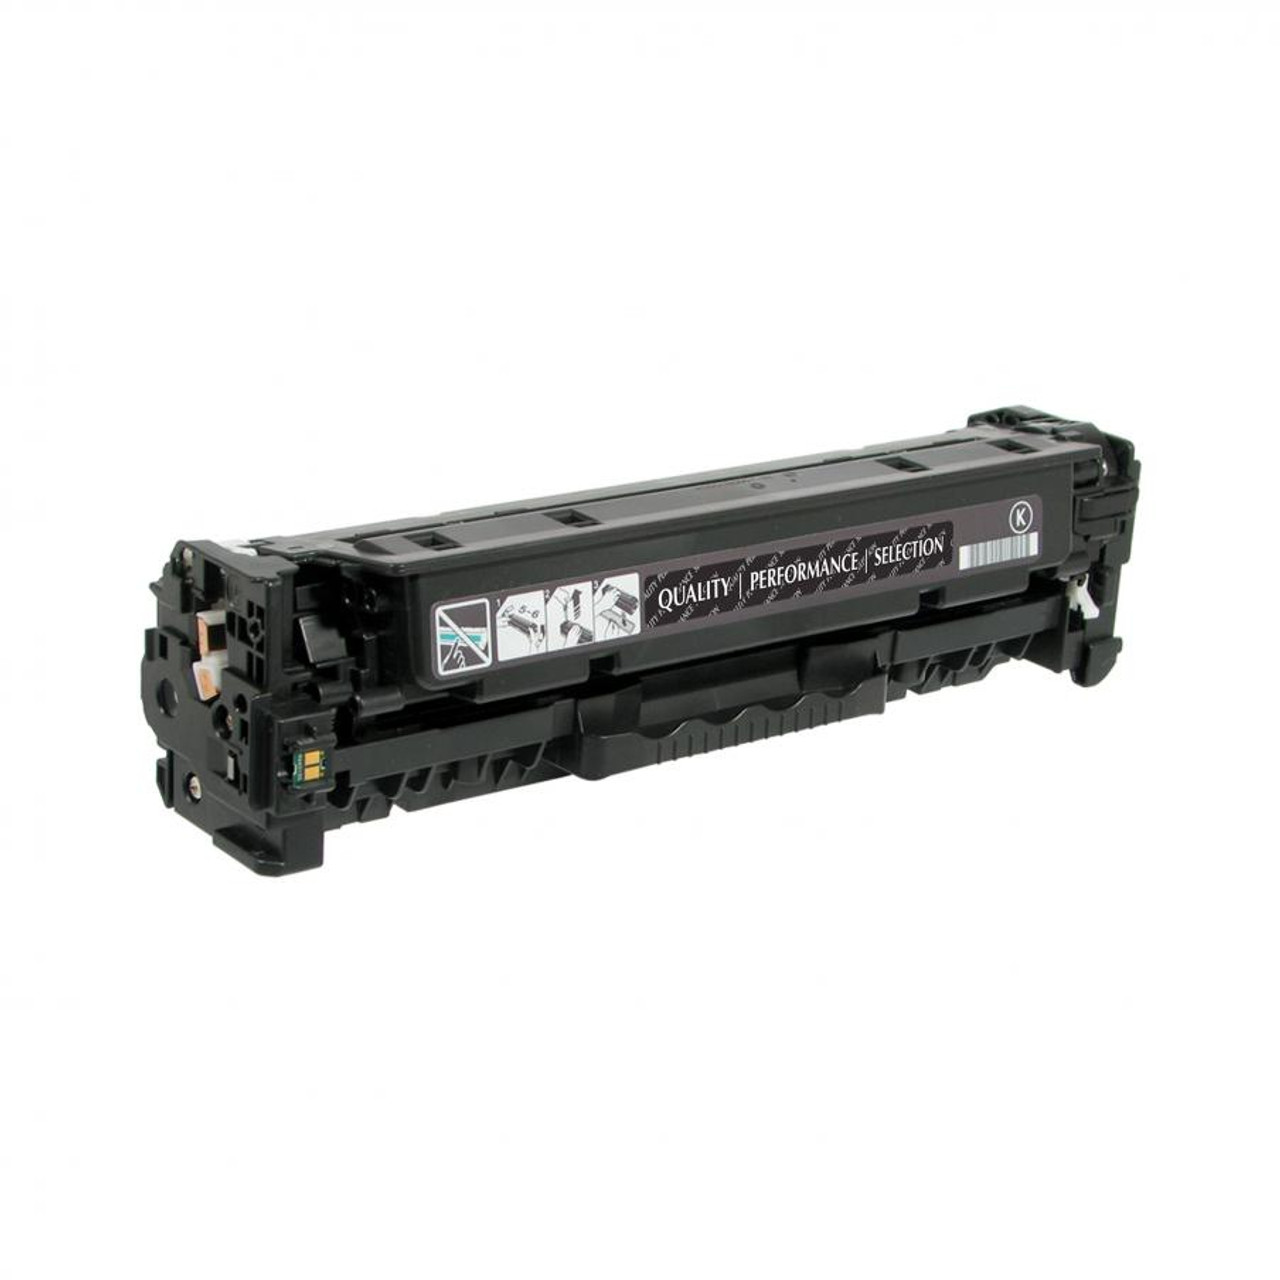 Clover Imaging Remanufactured for HP CE410X(J) 305X Black For use in HP M351 M375 M375NW M451 M451DN M451DW M451NW M475 M475DN  Toner Cartridge 4600 Page Yield